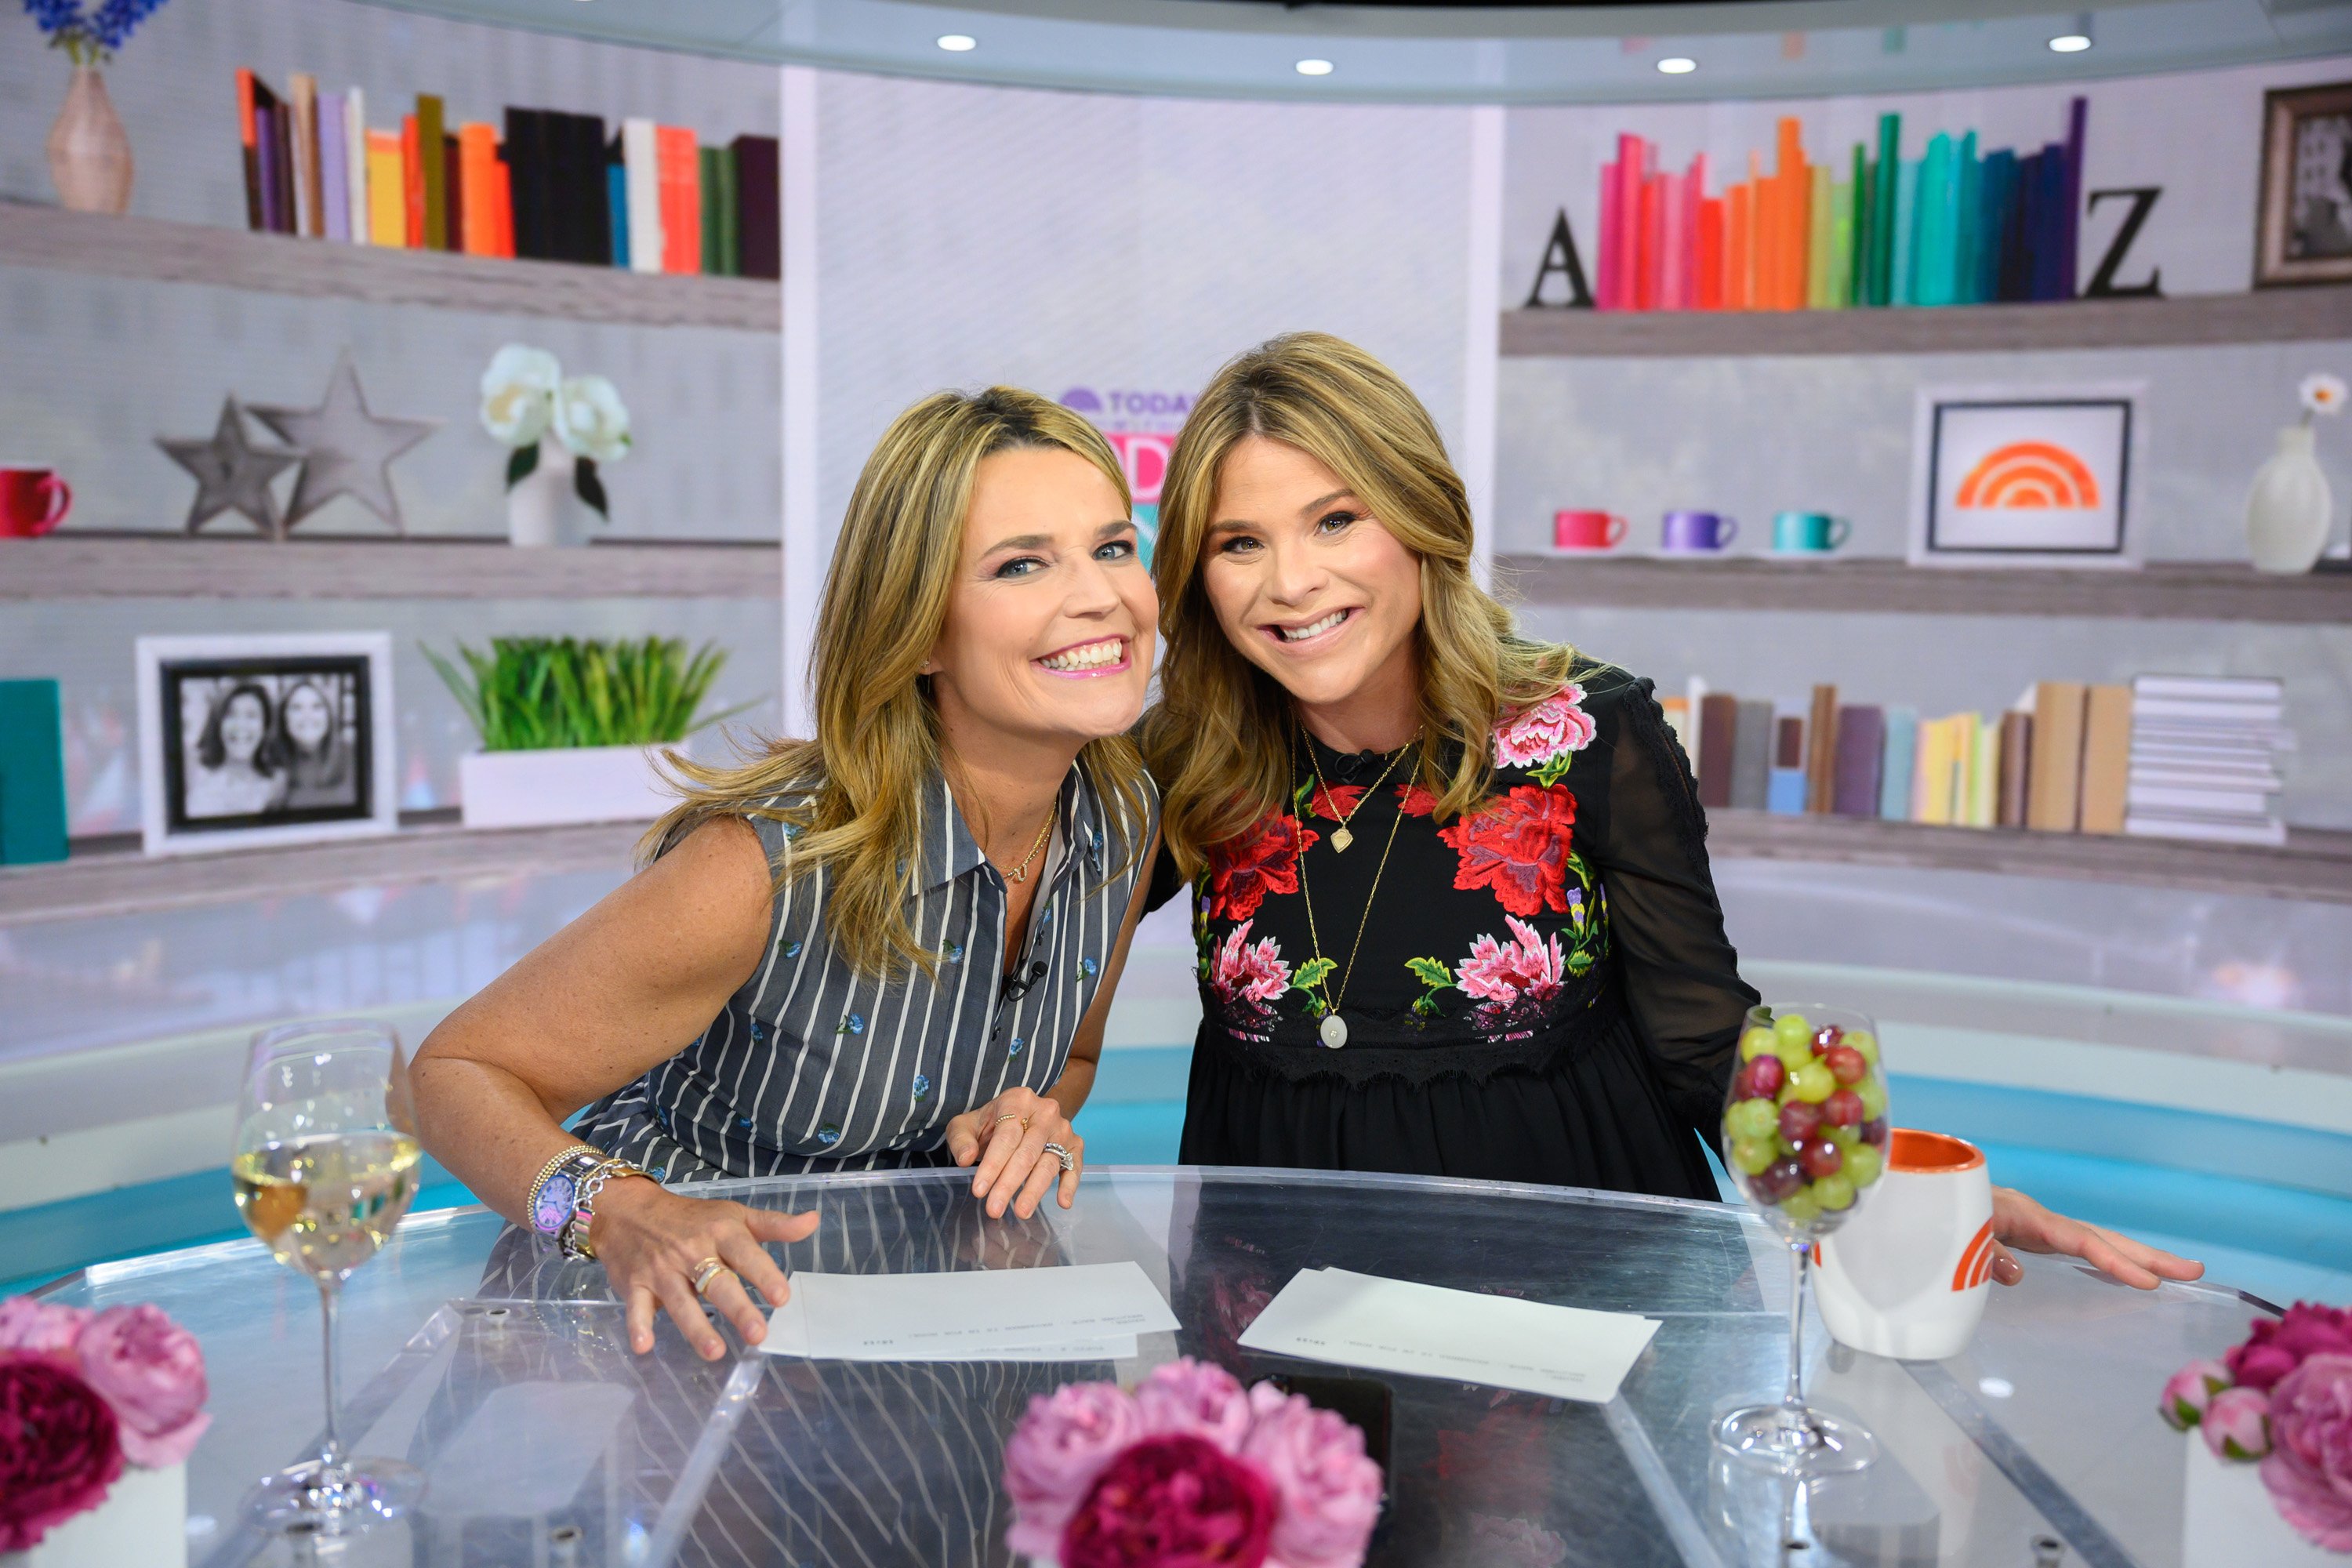 Savannah Guthrie and Jenna Bush Hager on the TODAY show, on July 15, 2019 | Photo: Getty Images